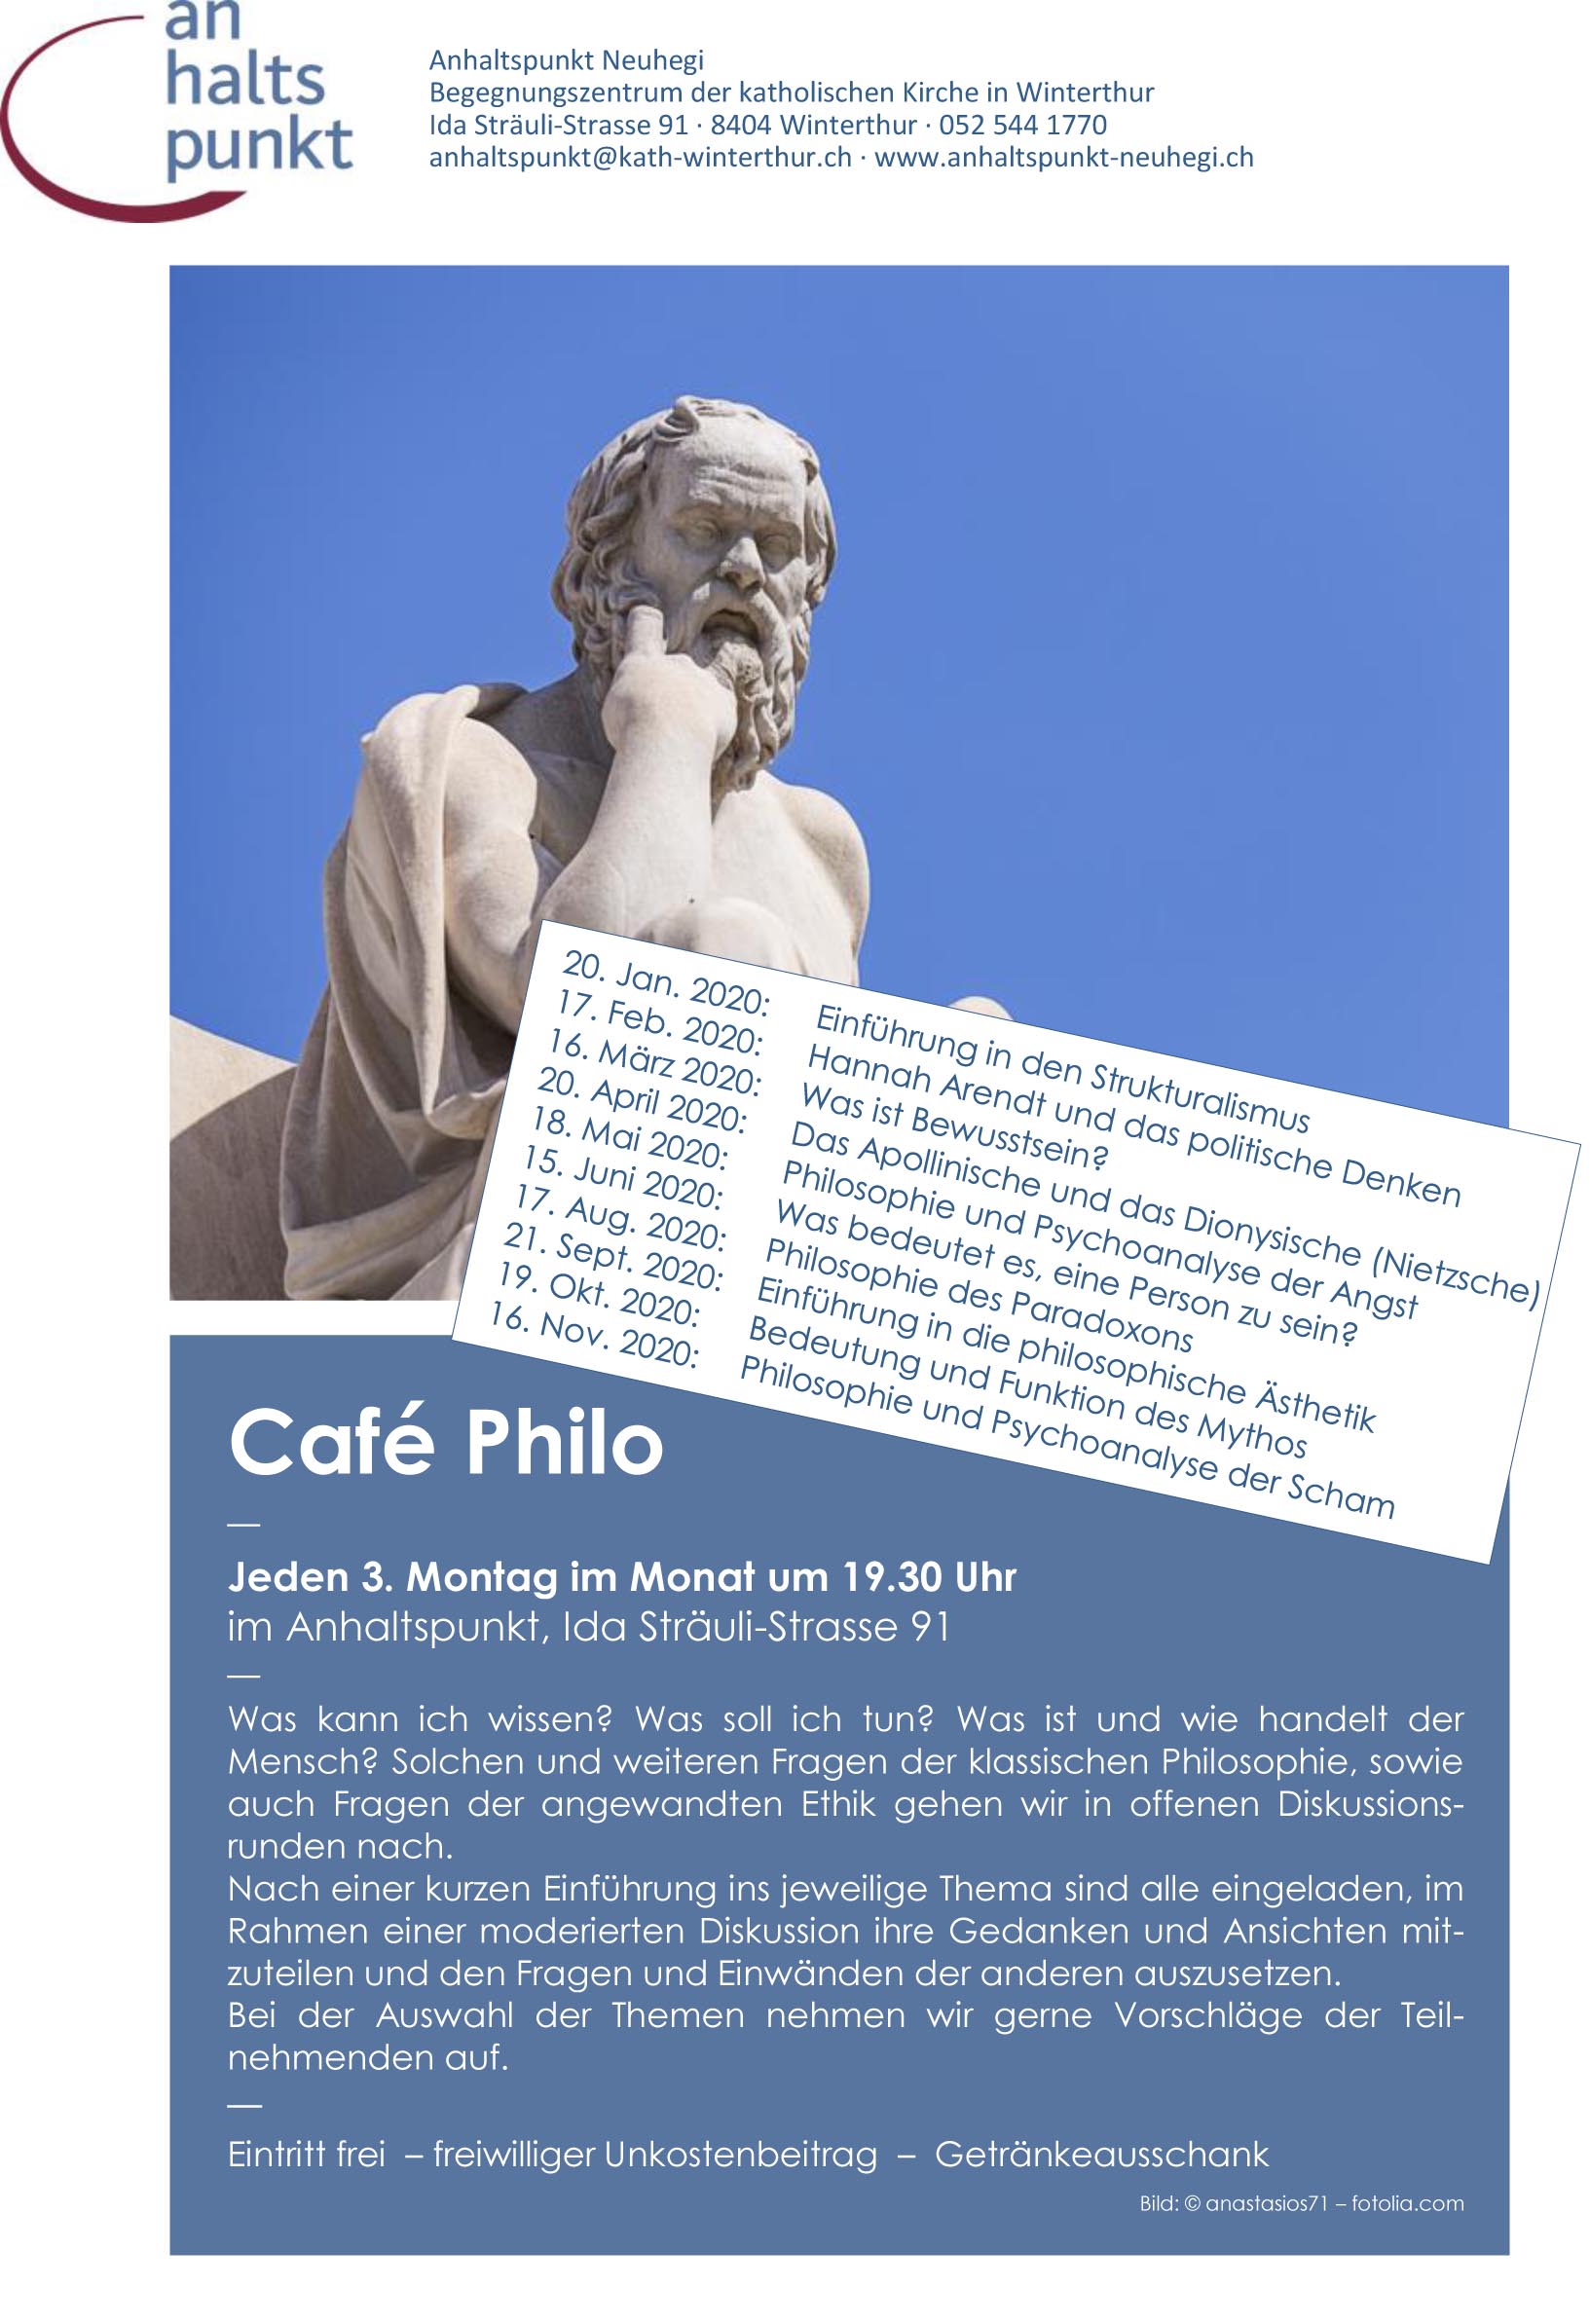 ahp Cafe Philo 20